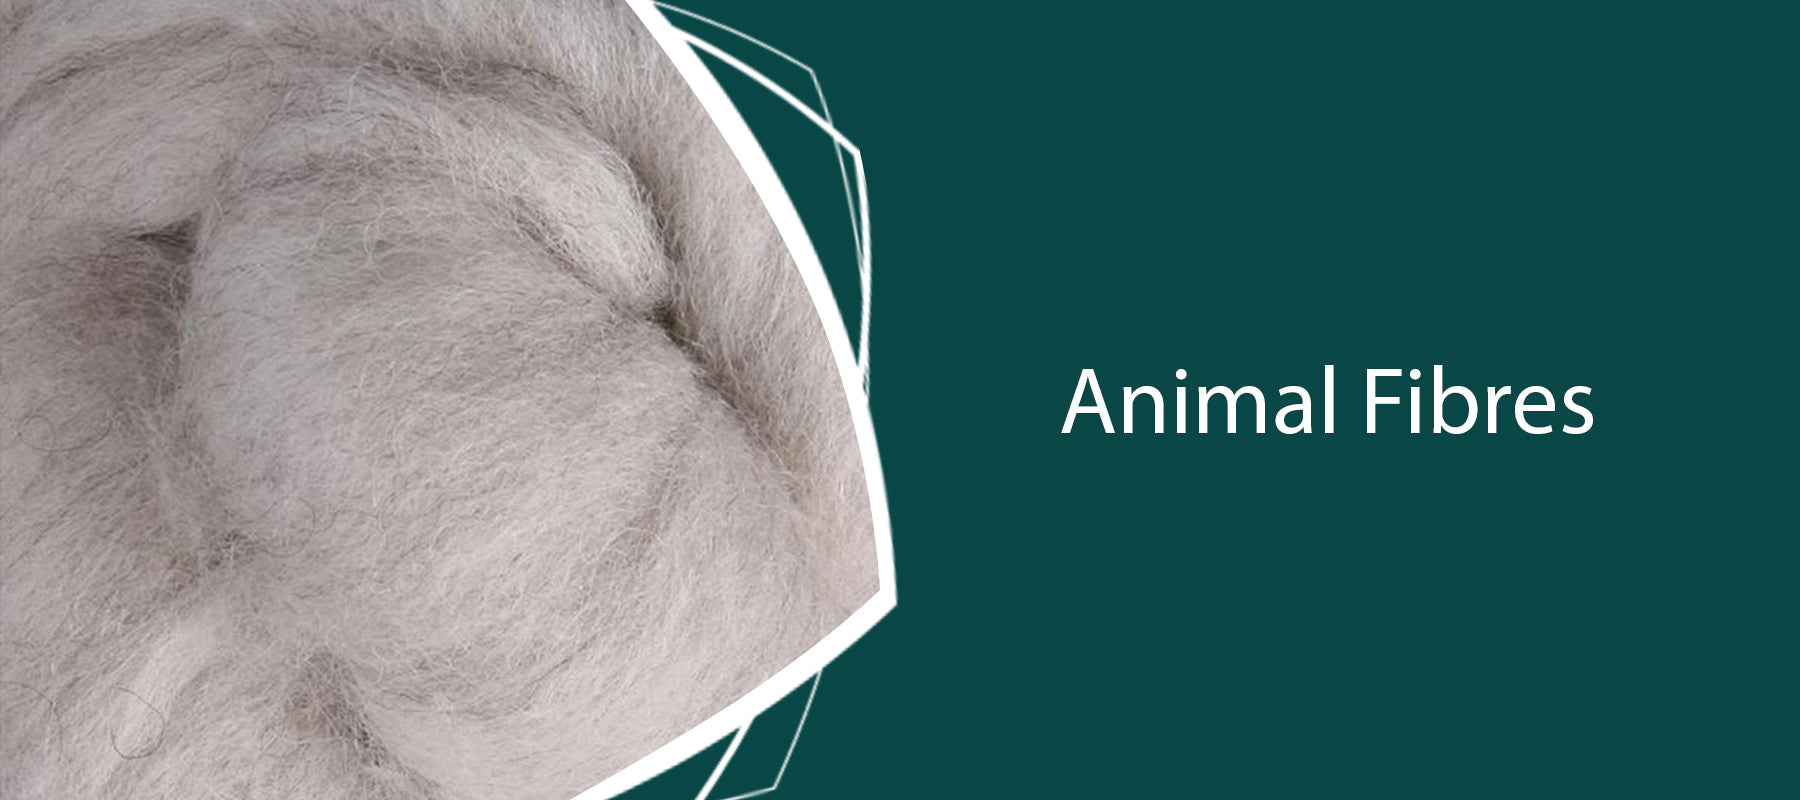 Buy animal fibres for spinning and felting - Thread Collective Australia